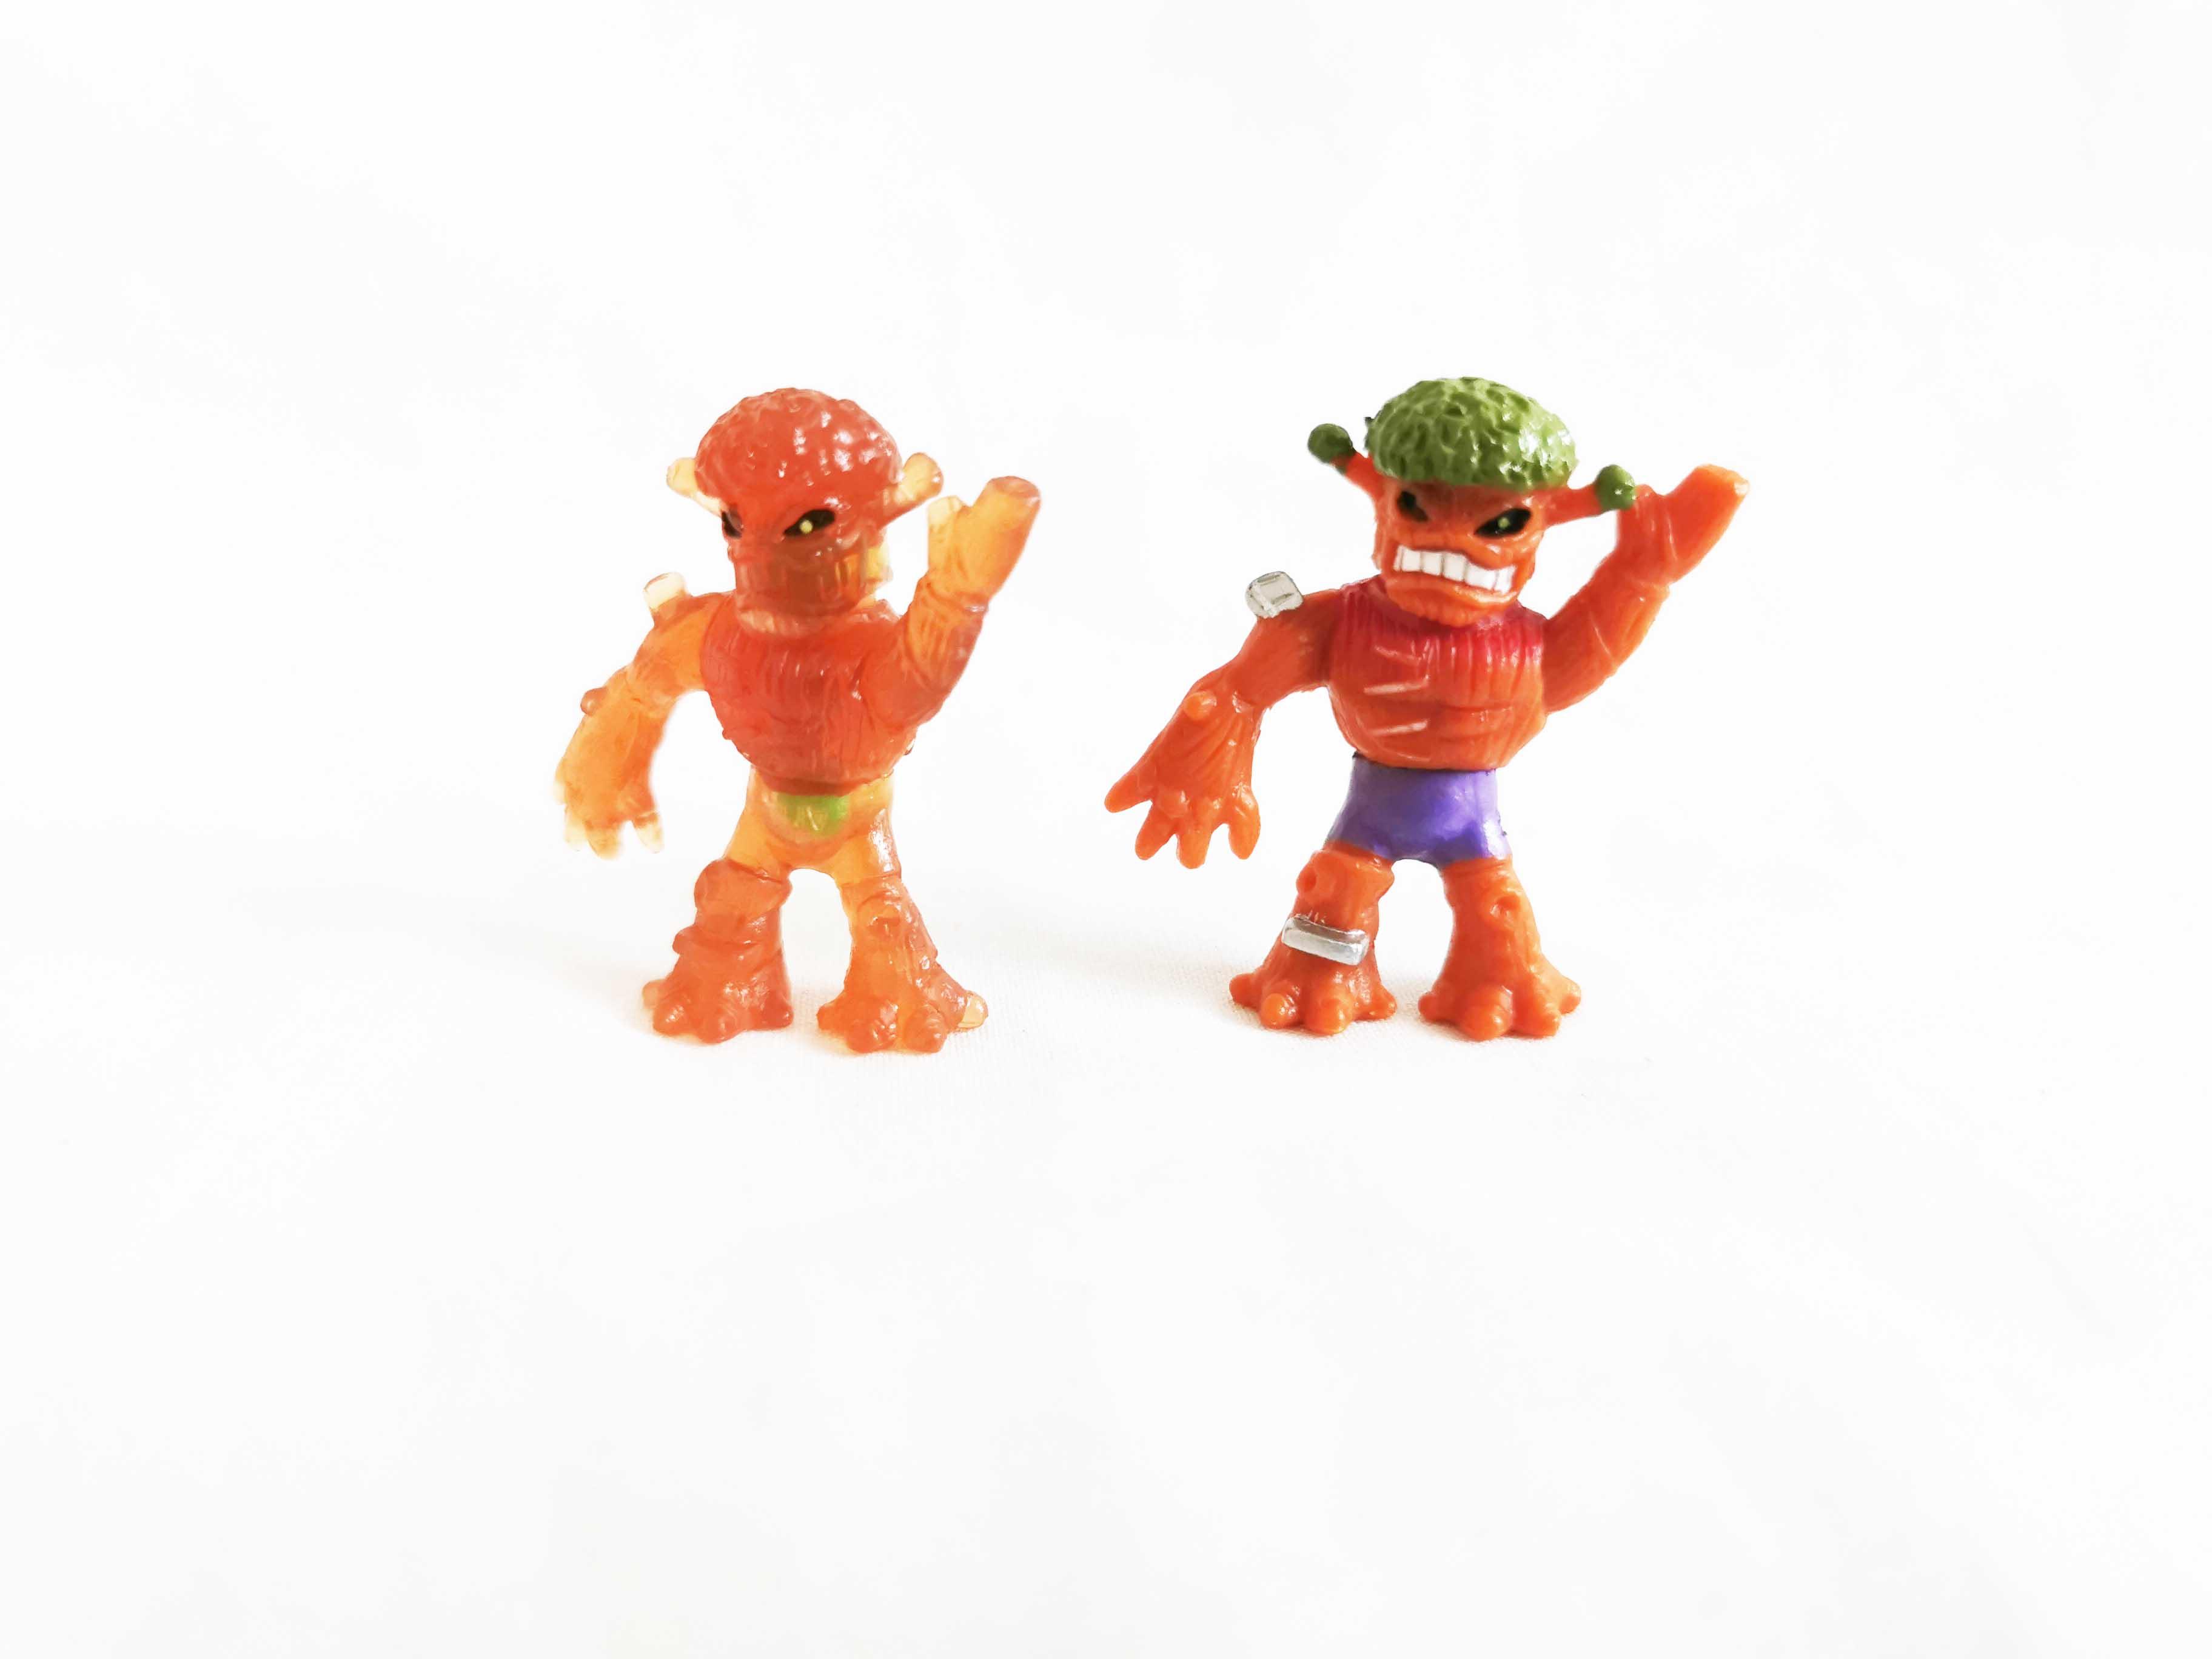 Mutant Mania Hack Saw Figures Both versions Ultra Rare #017 Moose Toys